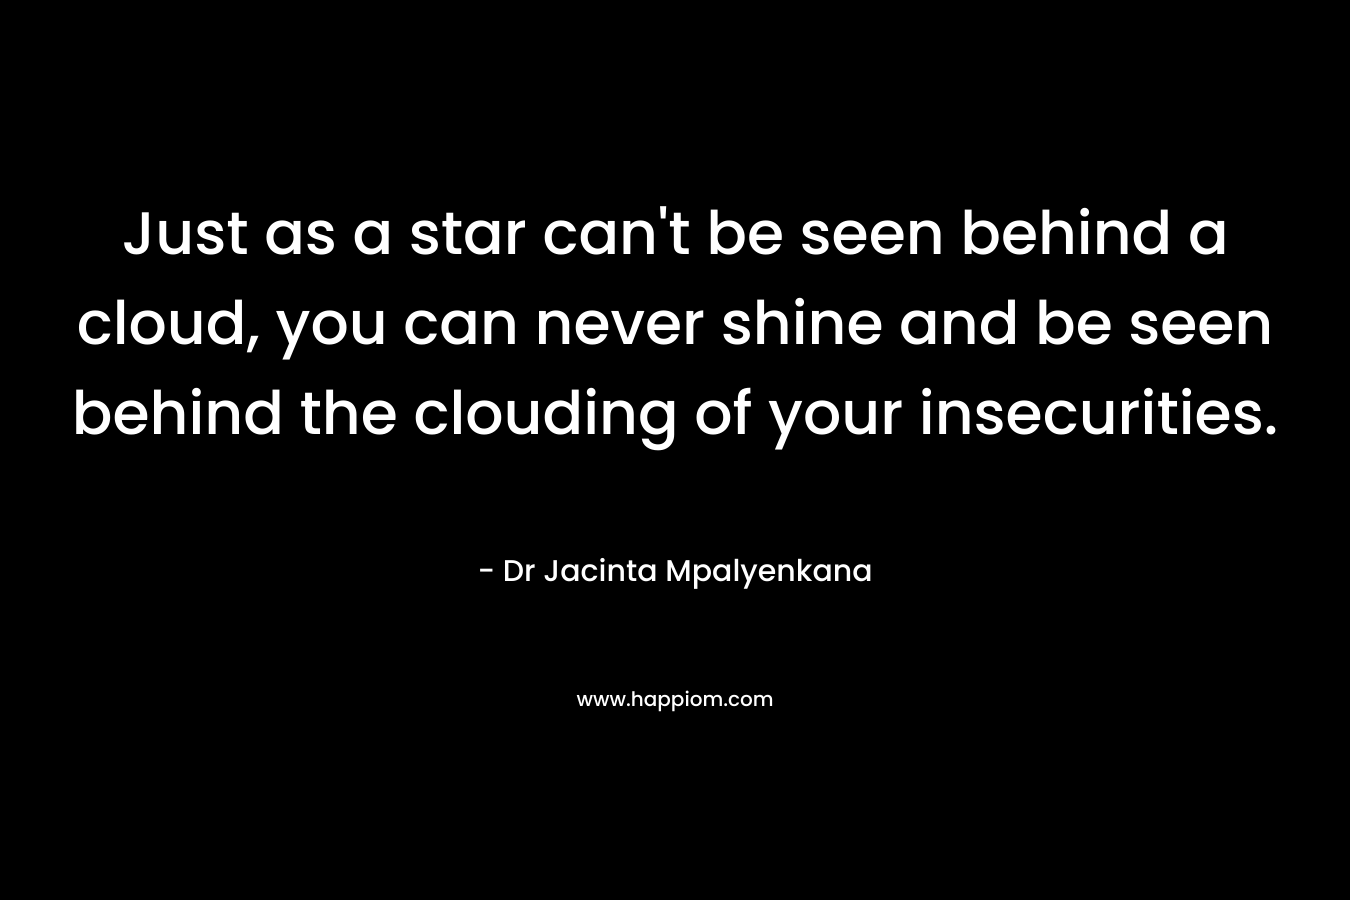 Just as a star can't be seen behind a cloud, you can never shine and be seen behind the clouding of your insecurities.